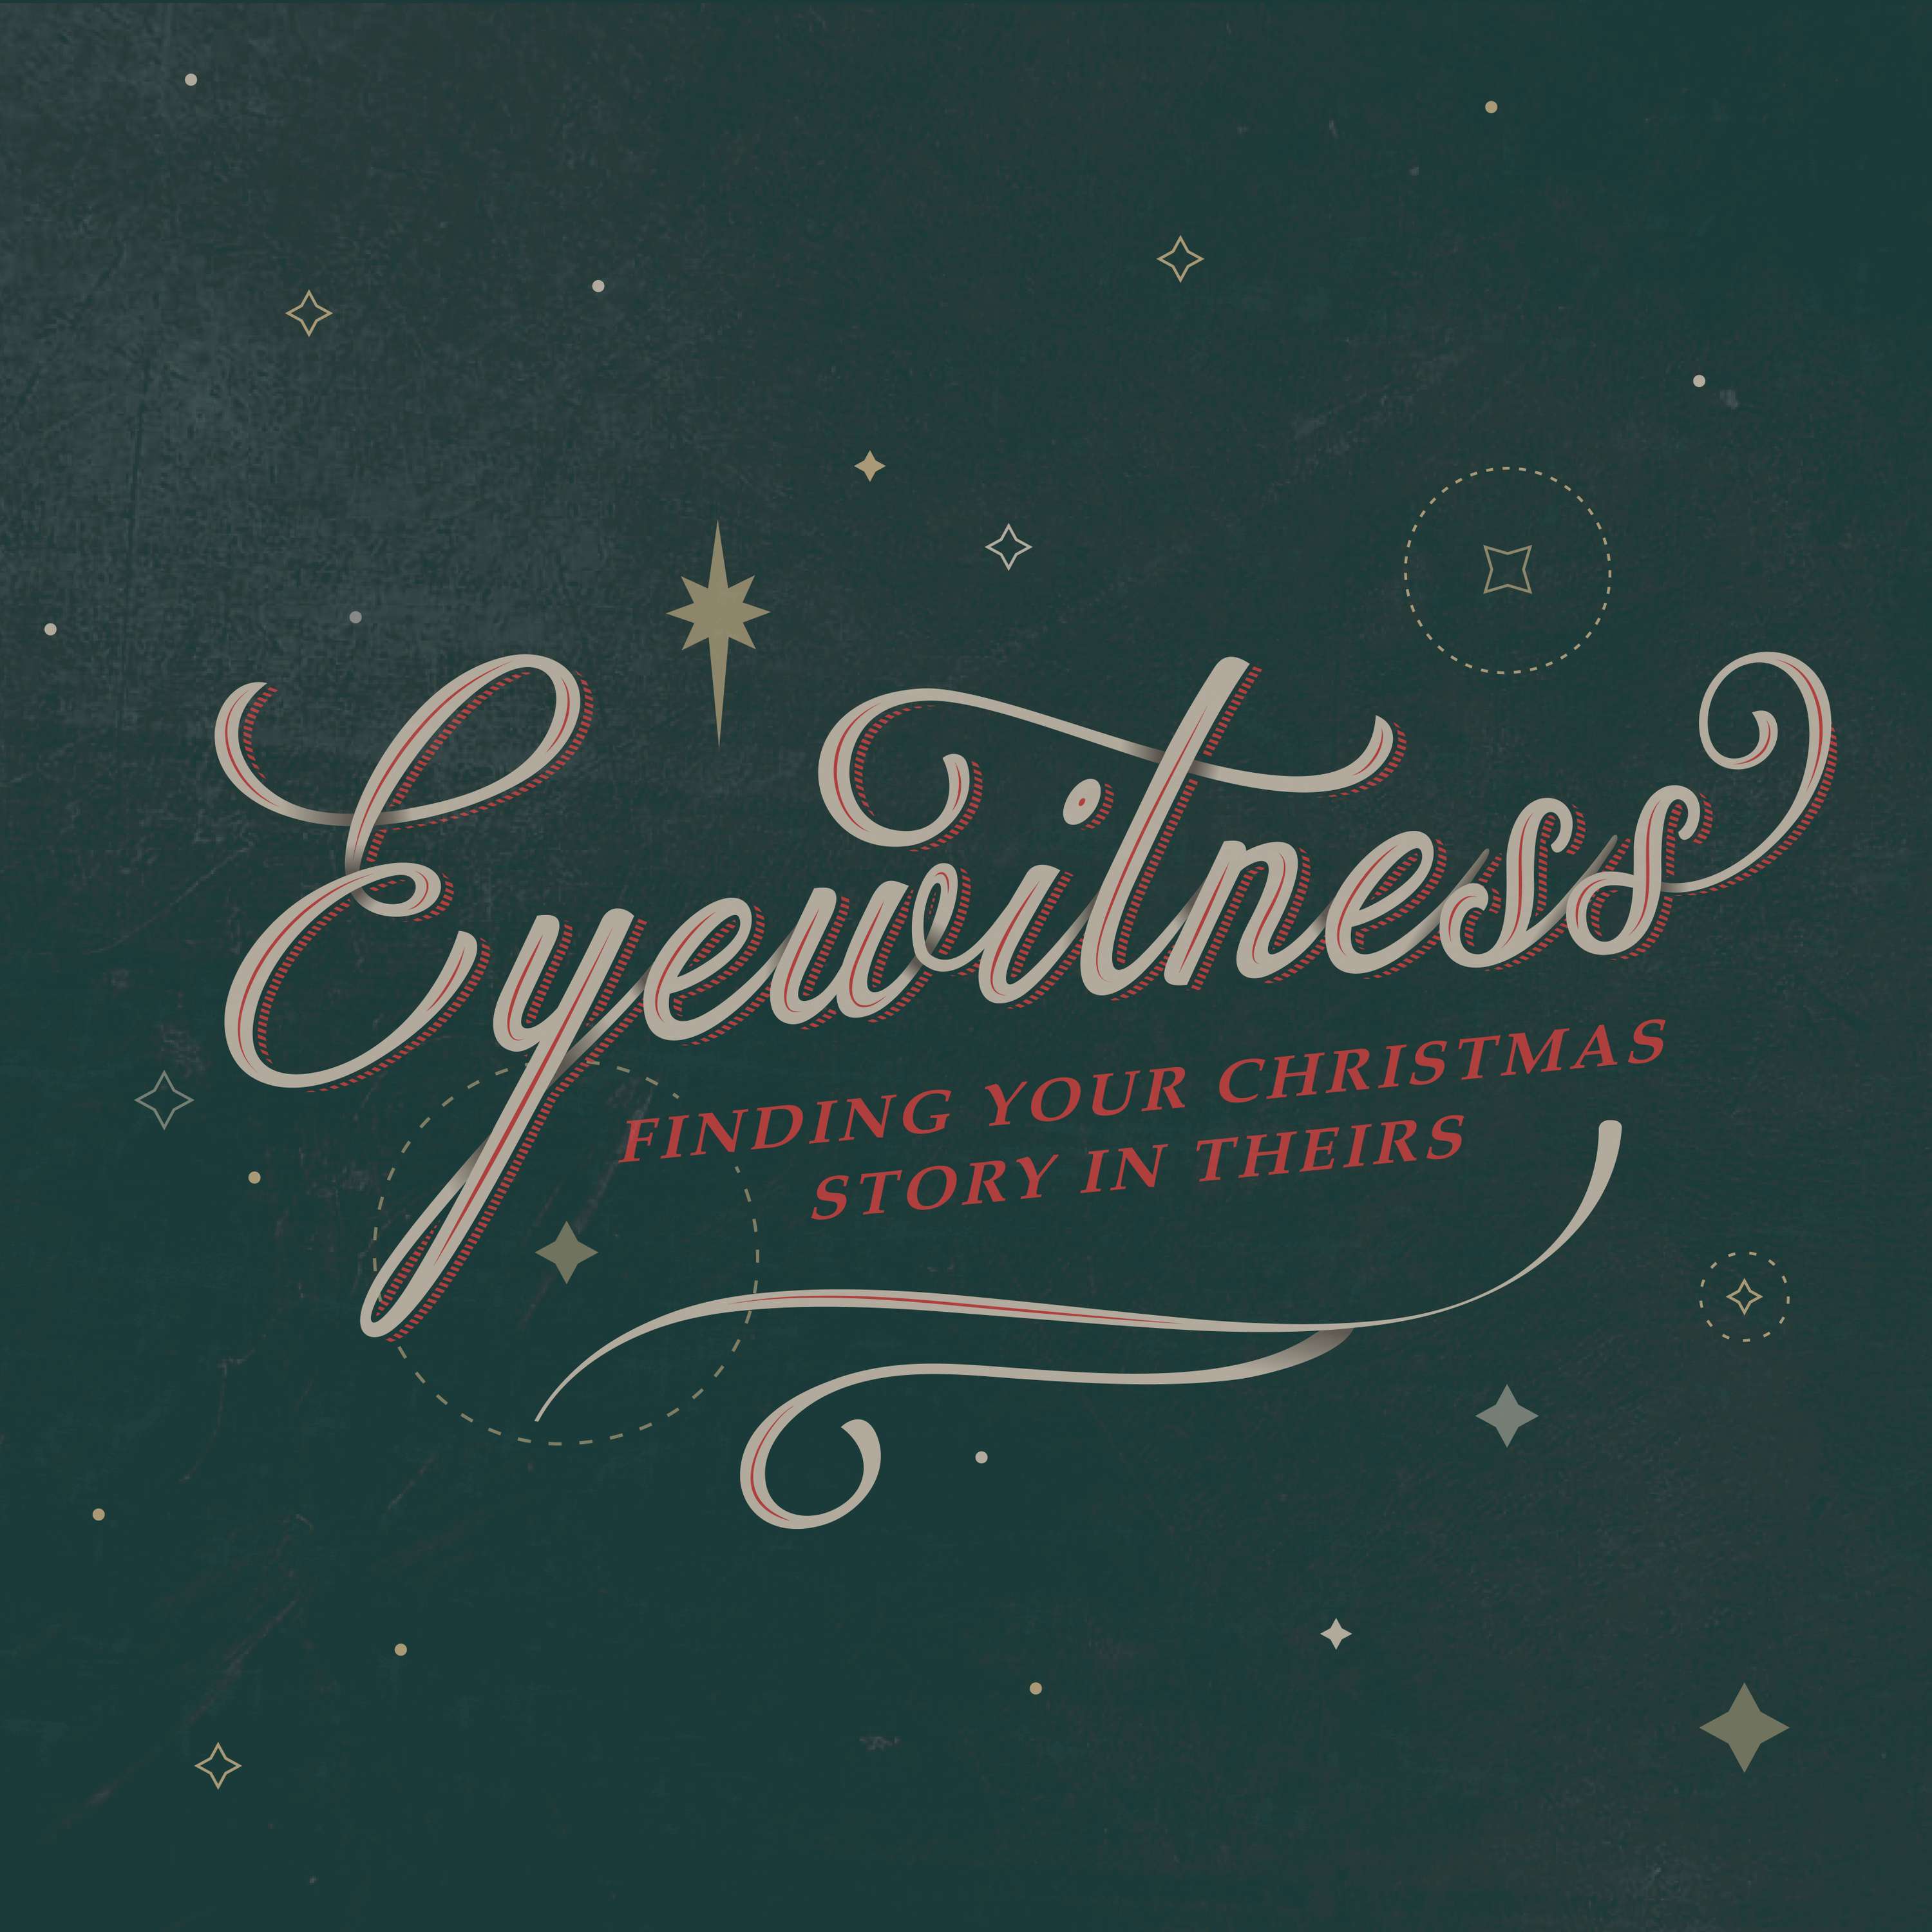 Eyewitness Part 1: Finding Your Christmas Story in Theirs